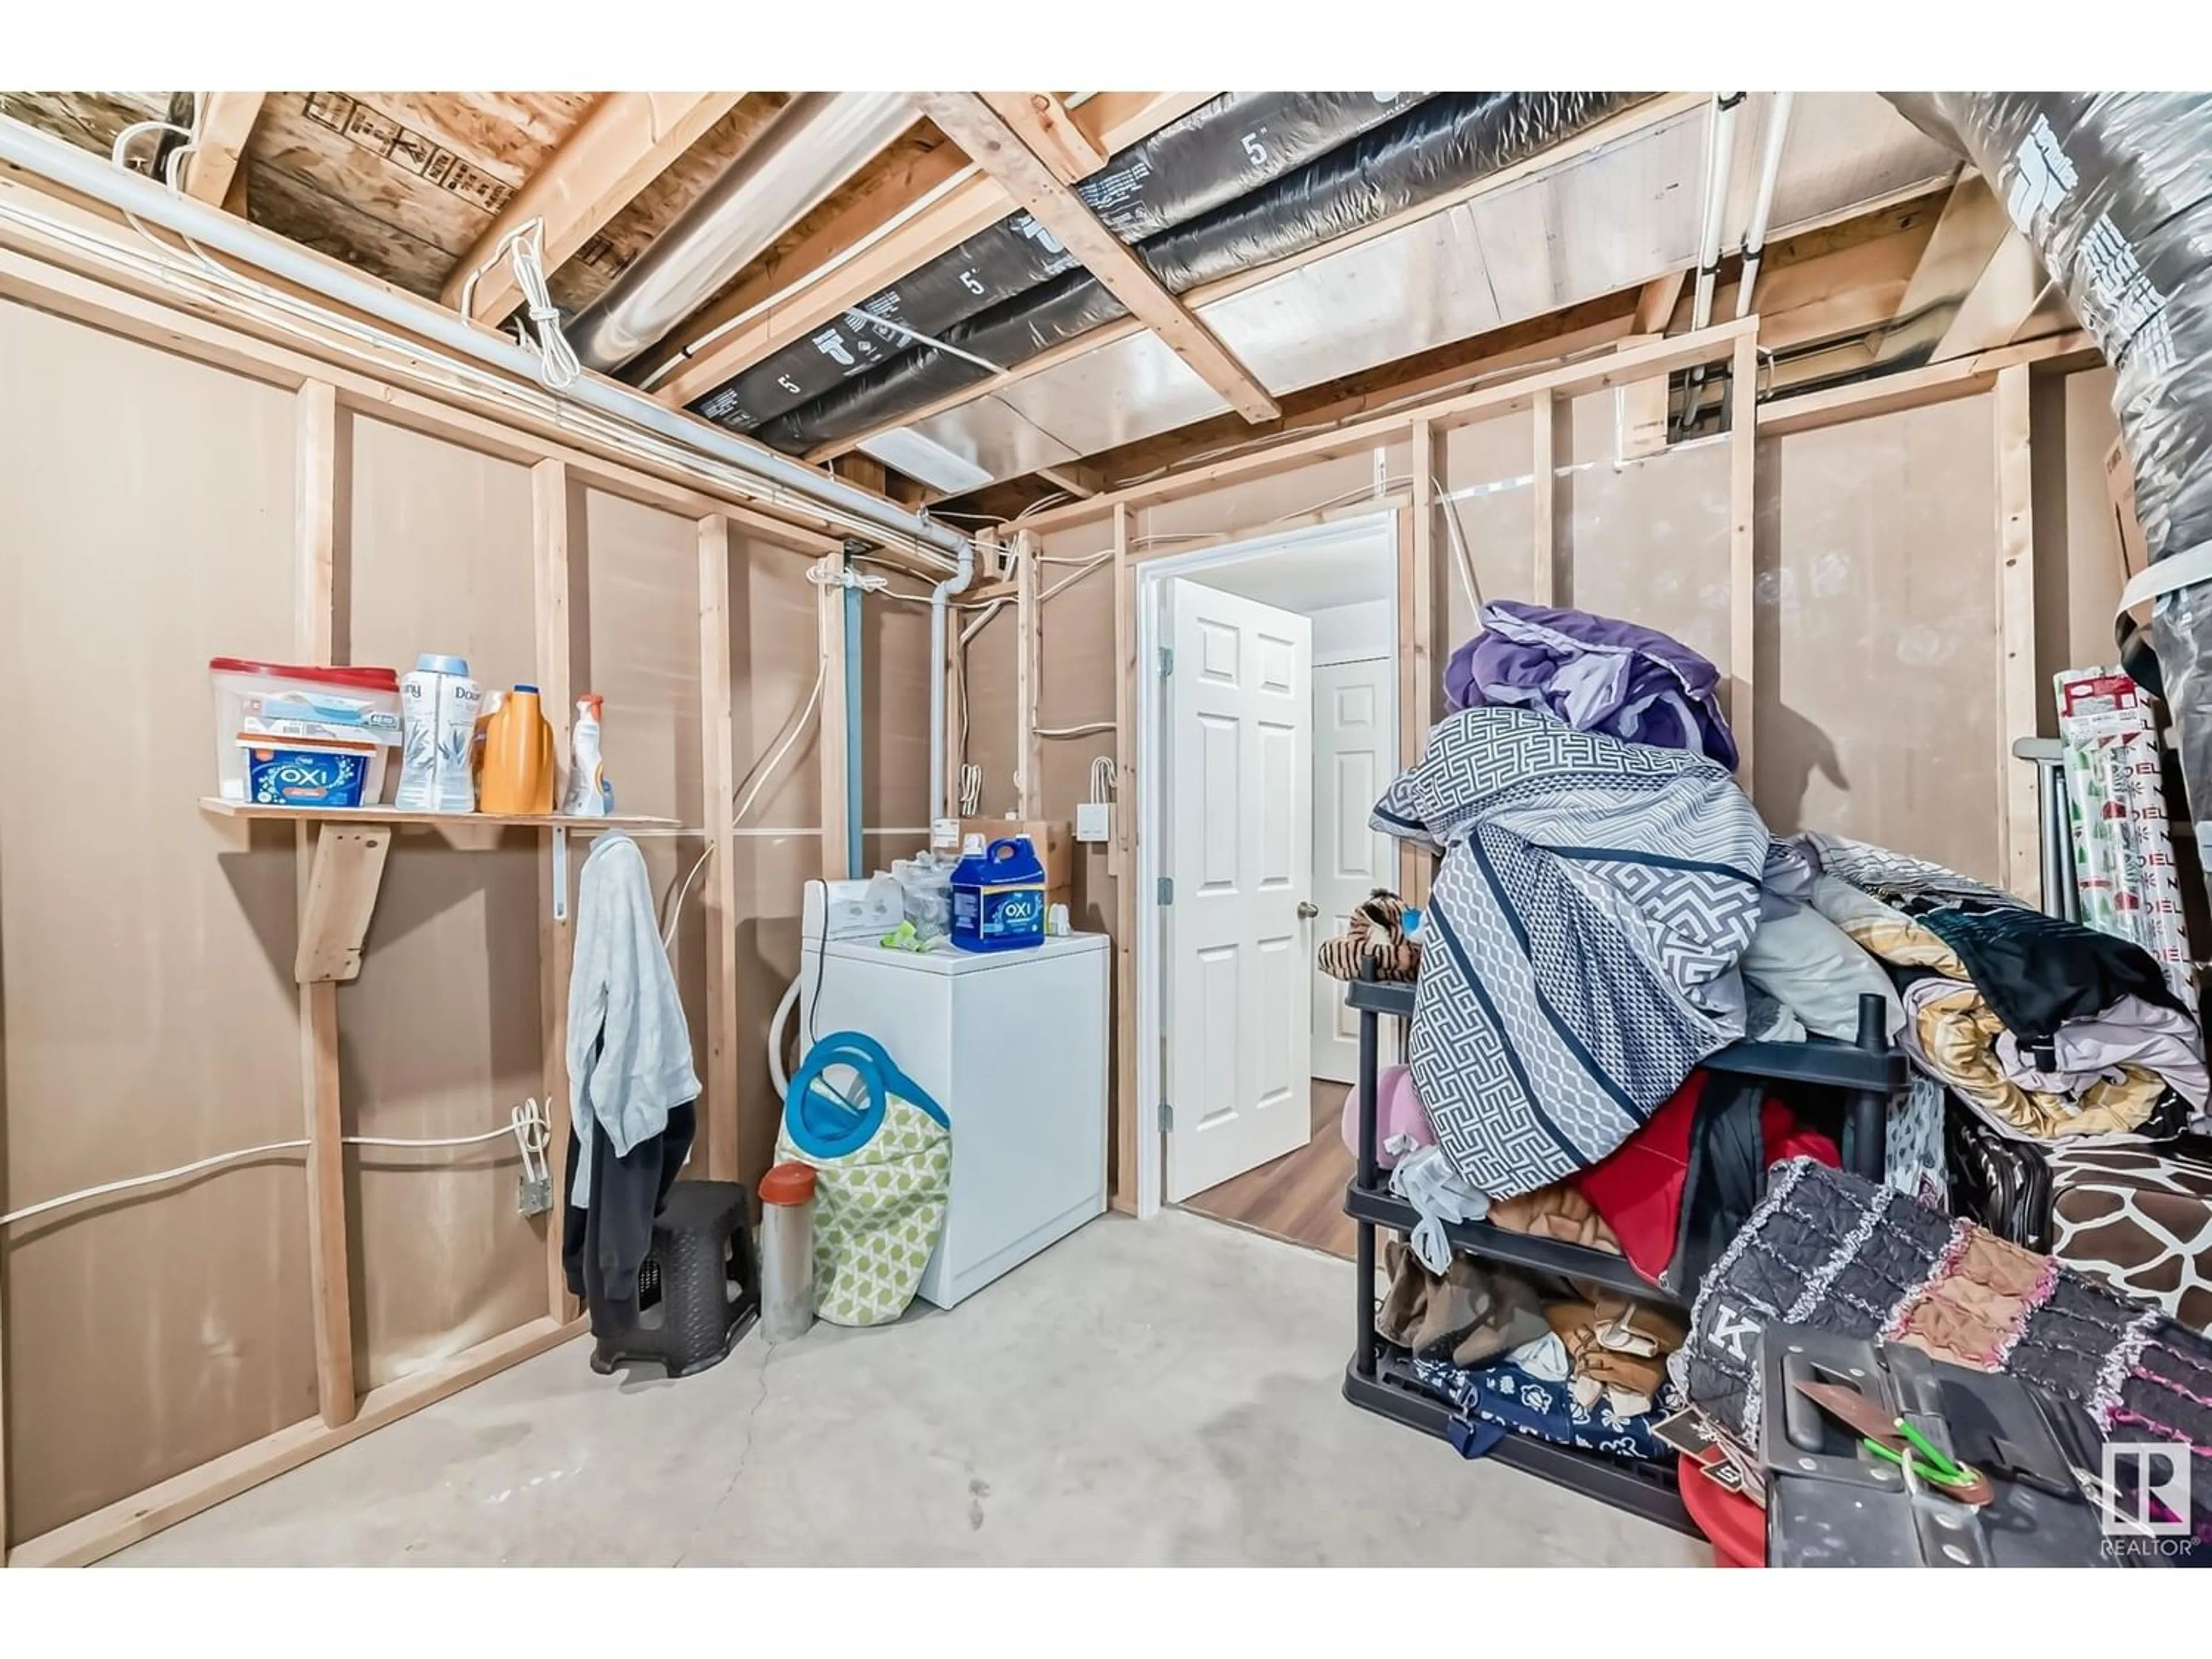 Storage room or clothes room or walk-in closet for #82 230 EDWARDS DR SW, Edmonton Alberta T6X1G7